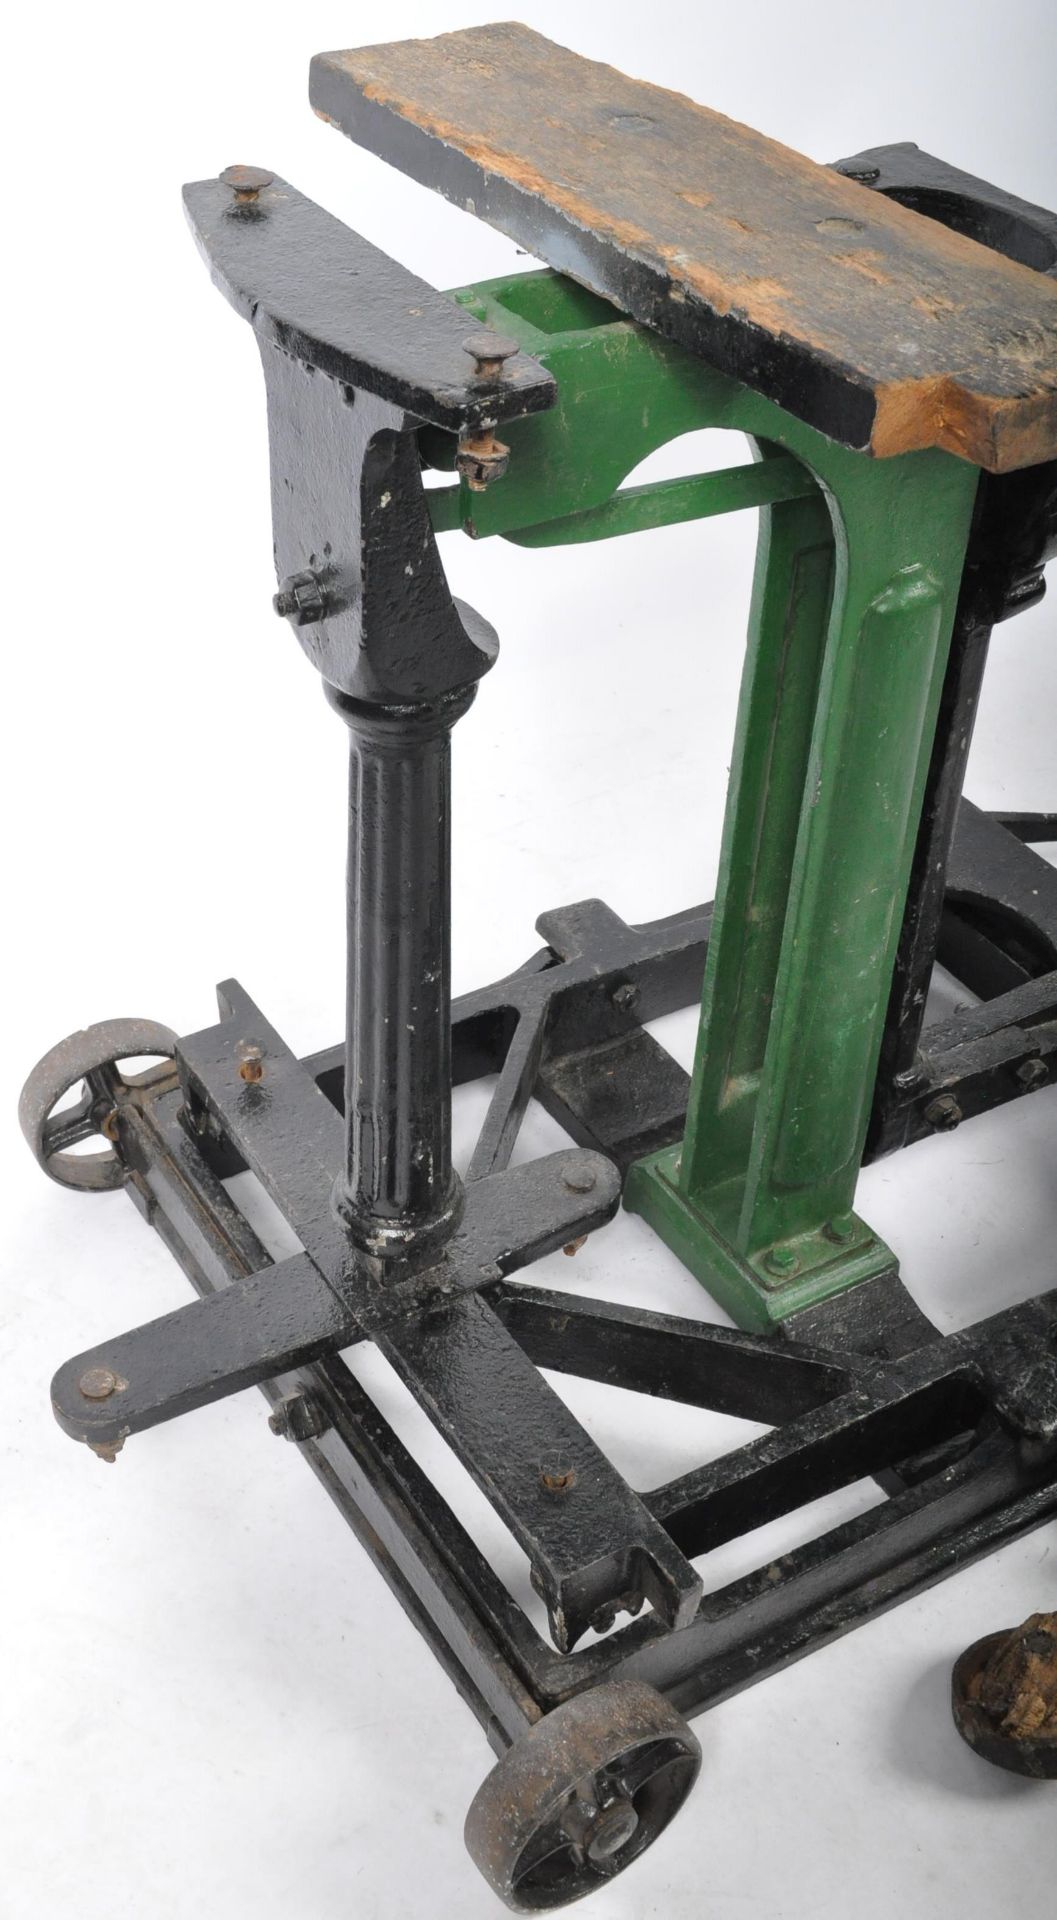 BRISTOL PORT HEAVY CAST IRON CUSTOMS & EXCISE WEIGHING SCALES - Image 3 of 6